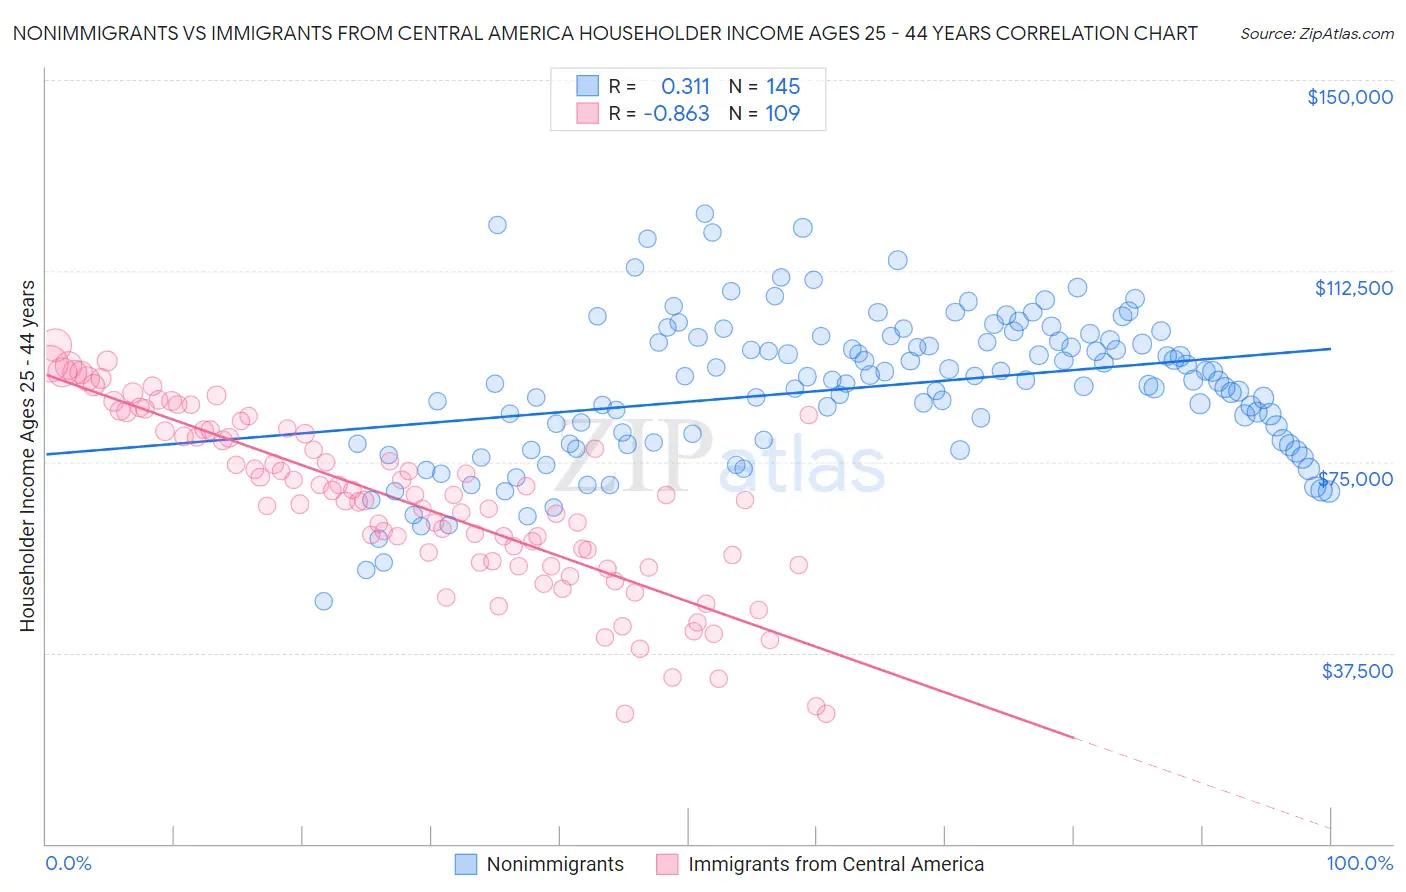 Nonimmigrants vs Immigrants from Central America Householder Income Ages 25 - 44 years